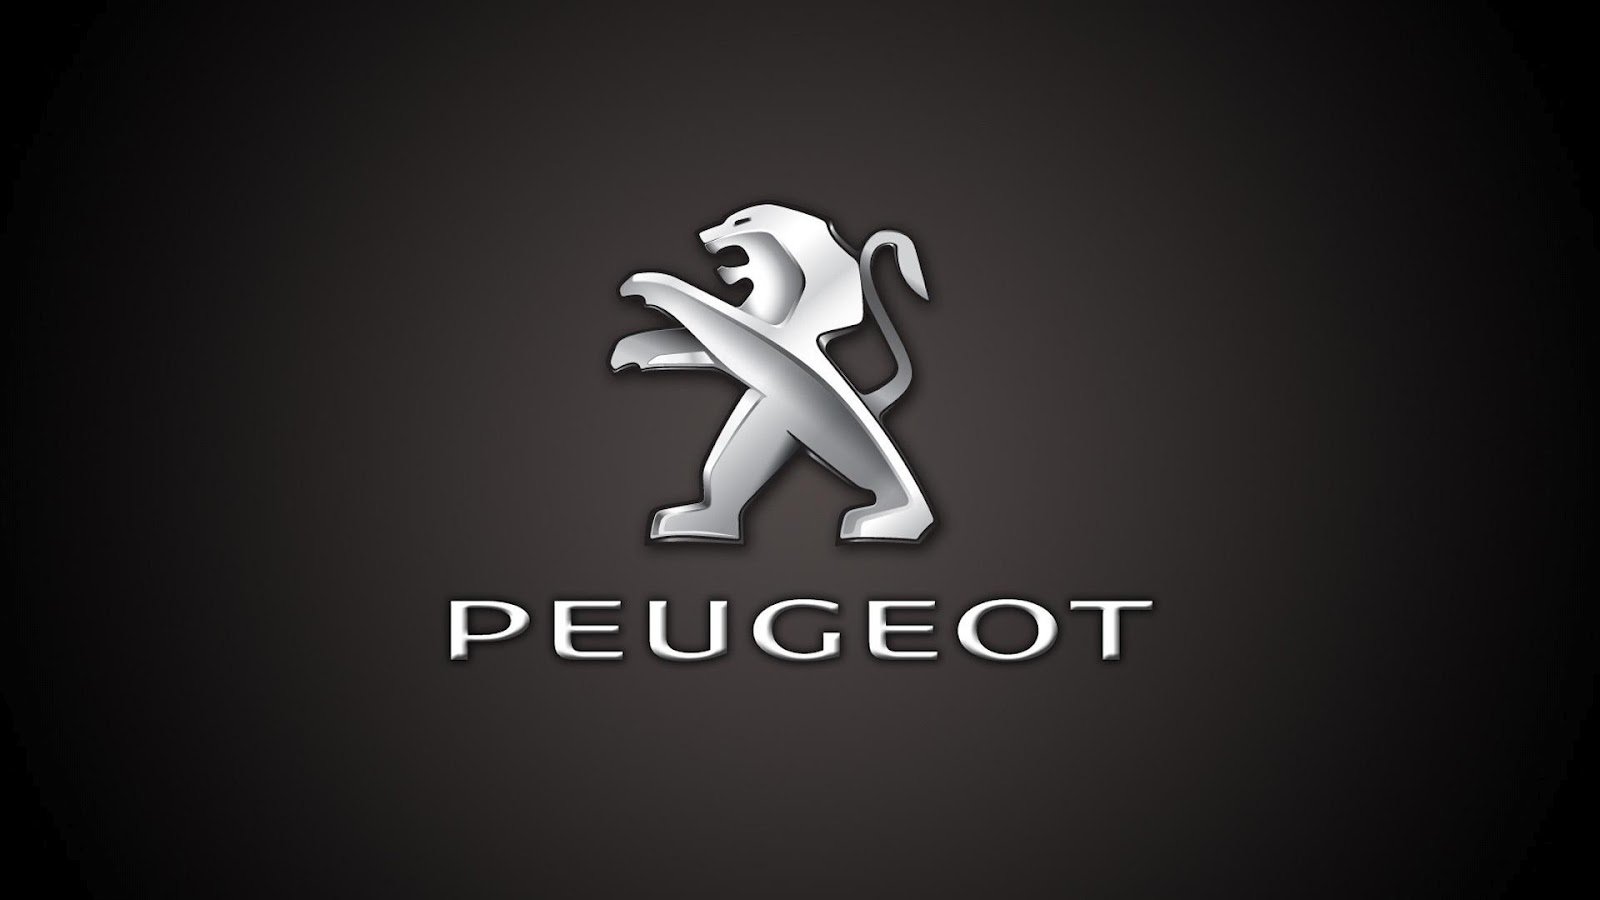 Peugeot Wallpaper And Background Image Id